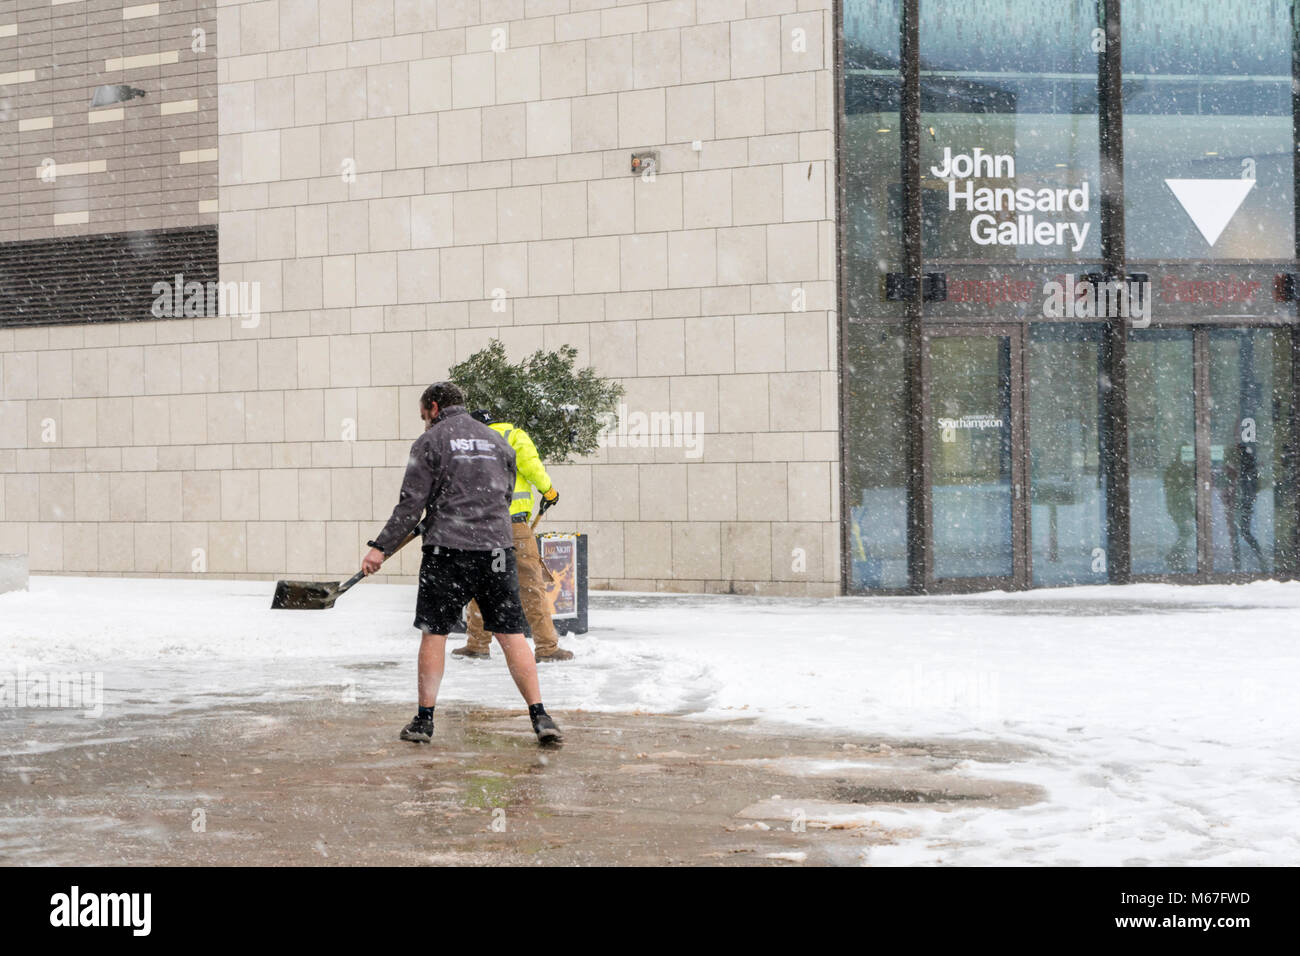 Southampton, UK. 1st of March 2018. Staff from Studio 144 in Southampton city centre, Hampshire, England,  are gritting the pavement during heavy snowfall during the 'Beast from the East' adverse weather conditions. Stock Photo